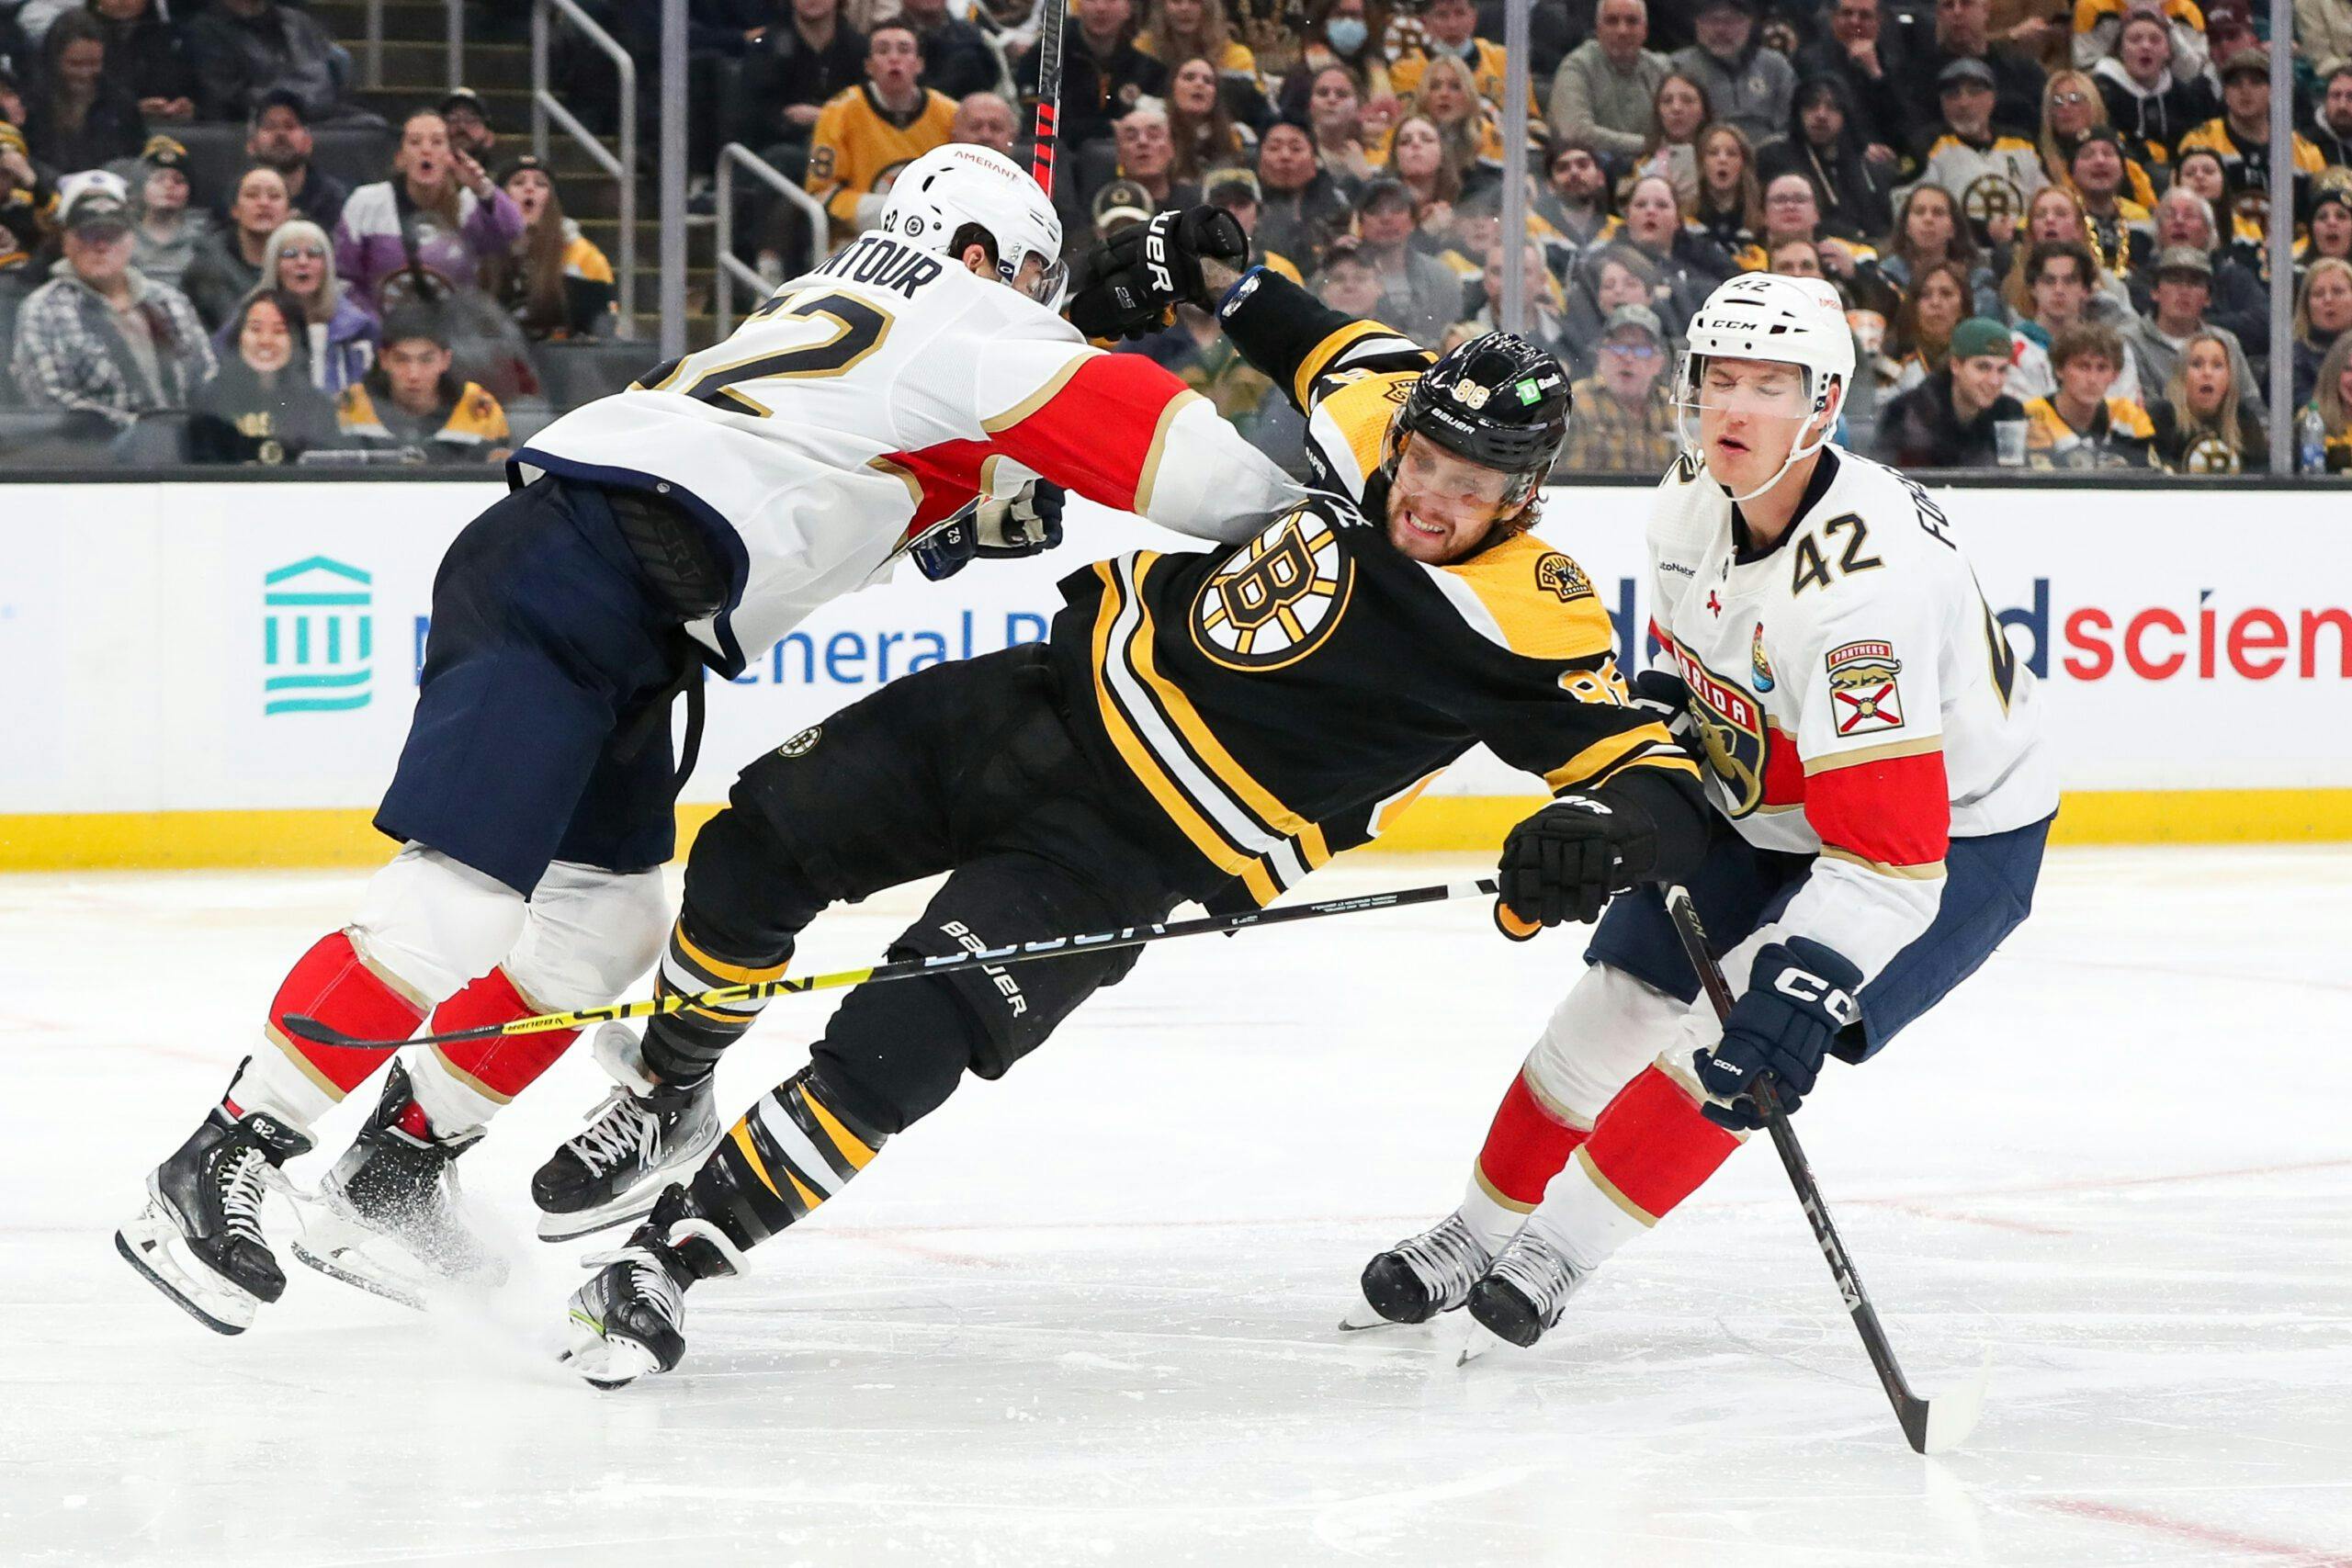 NHL playoff schedule: Bruins-Panthers opens Monday; see the schedule